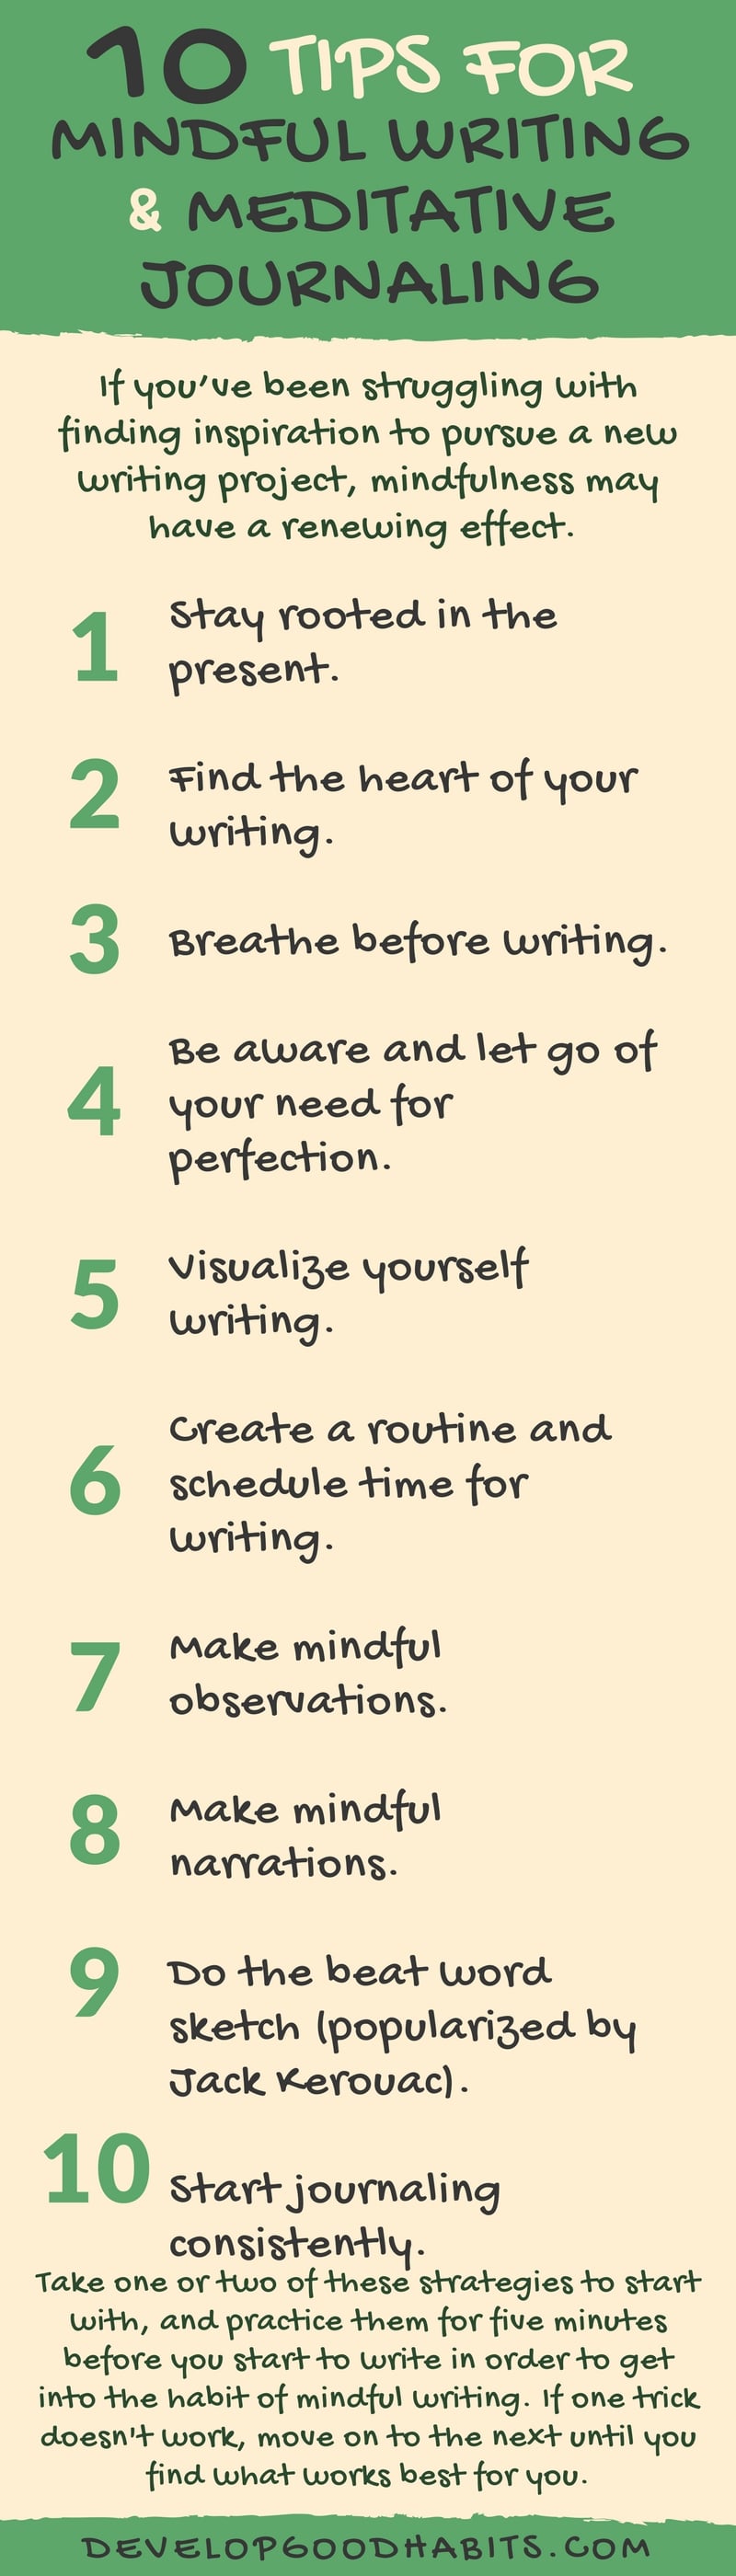 10 Tips for Mindful Writing and Meditative Journaling